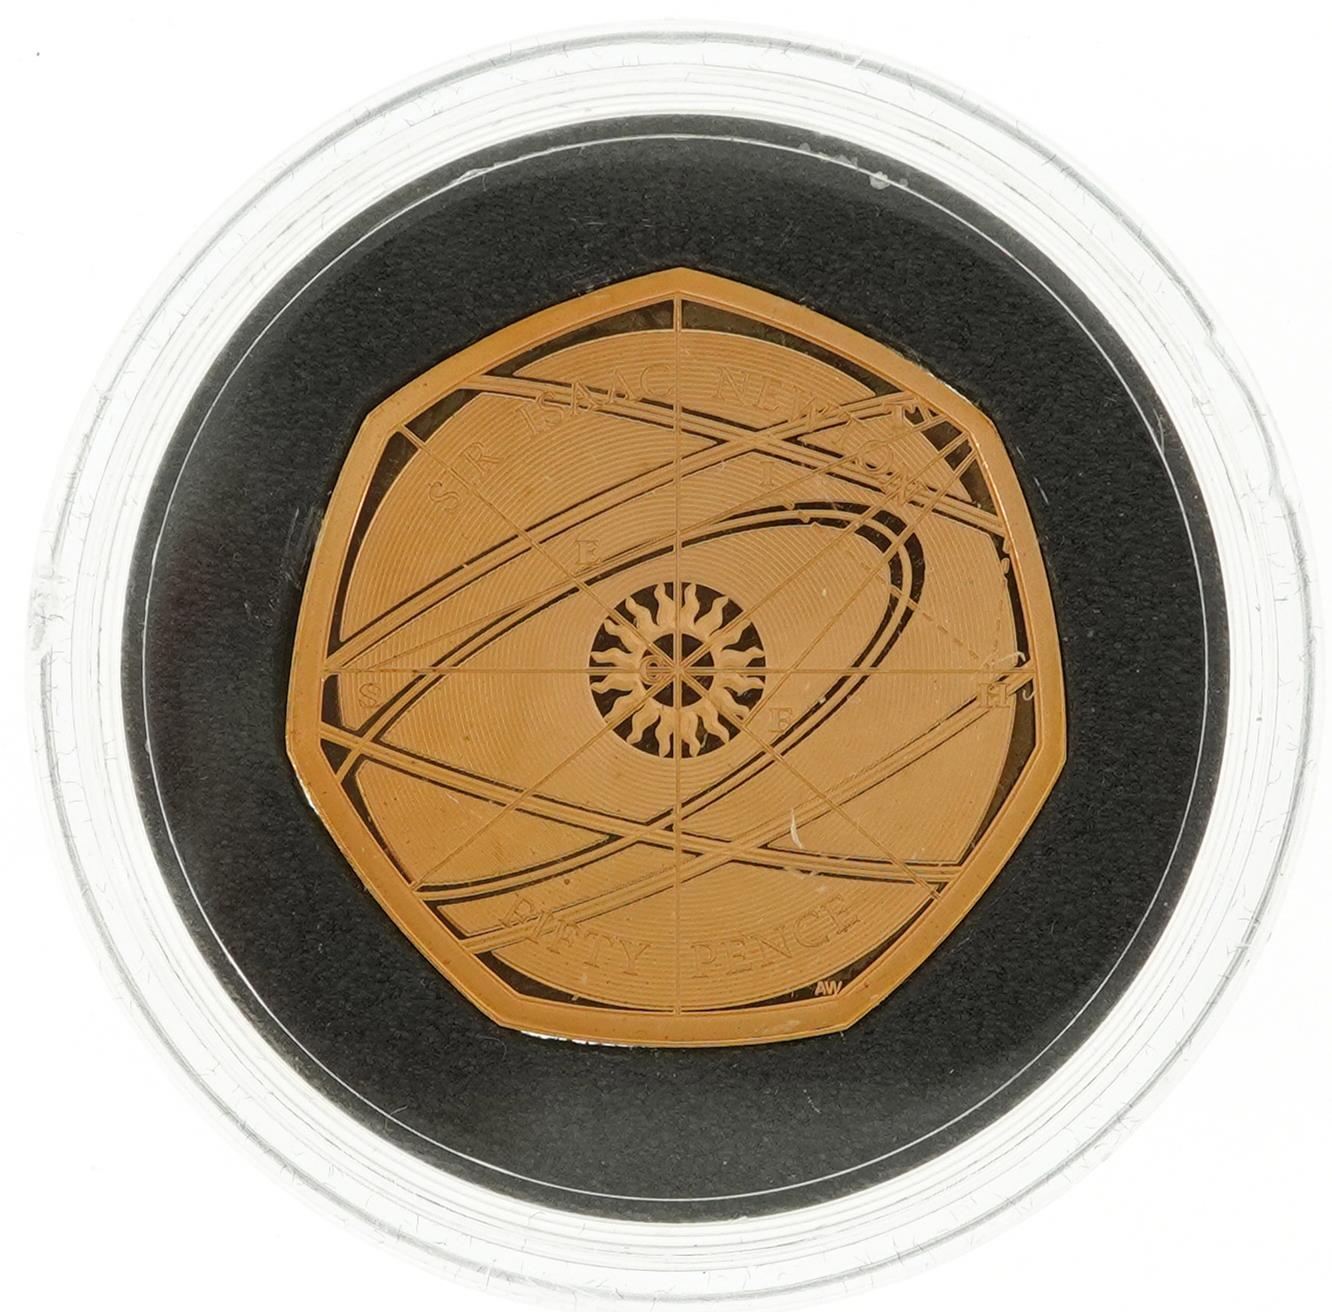 Elizabeth II 2017 gold proof fifty pence piece by The Royal Mint commemorating Sir Isaac Newton with - Image 2 of 4